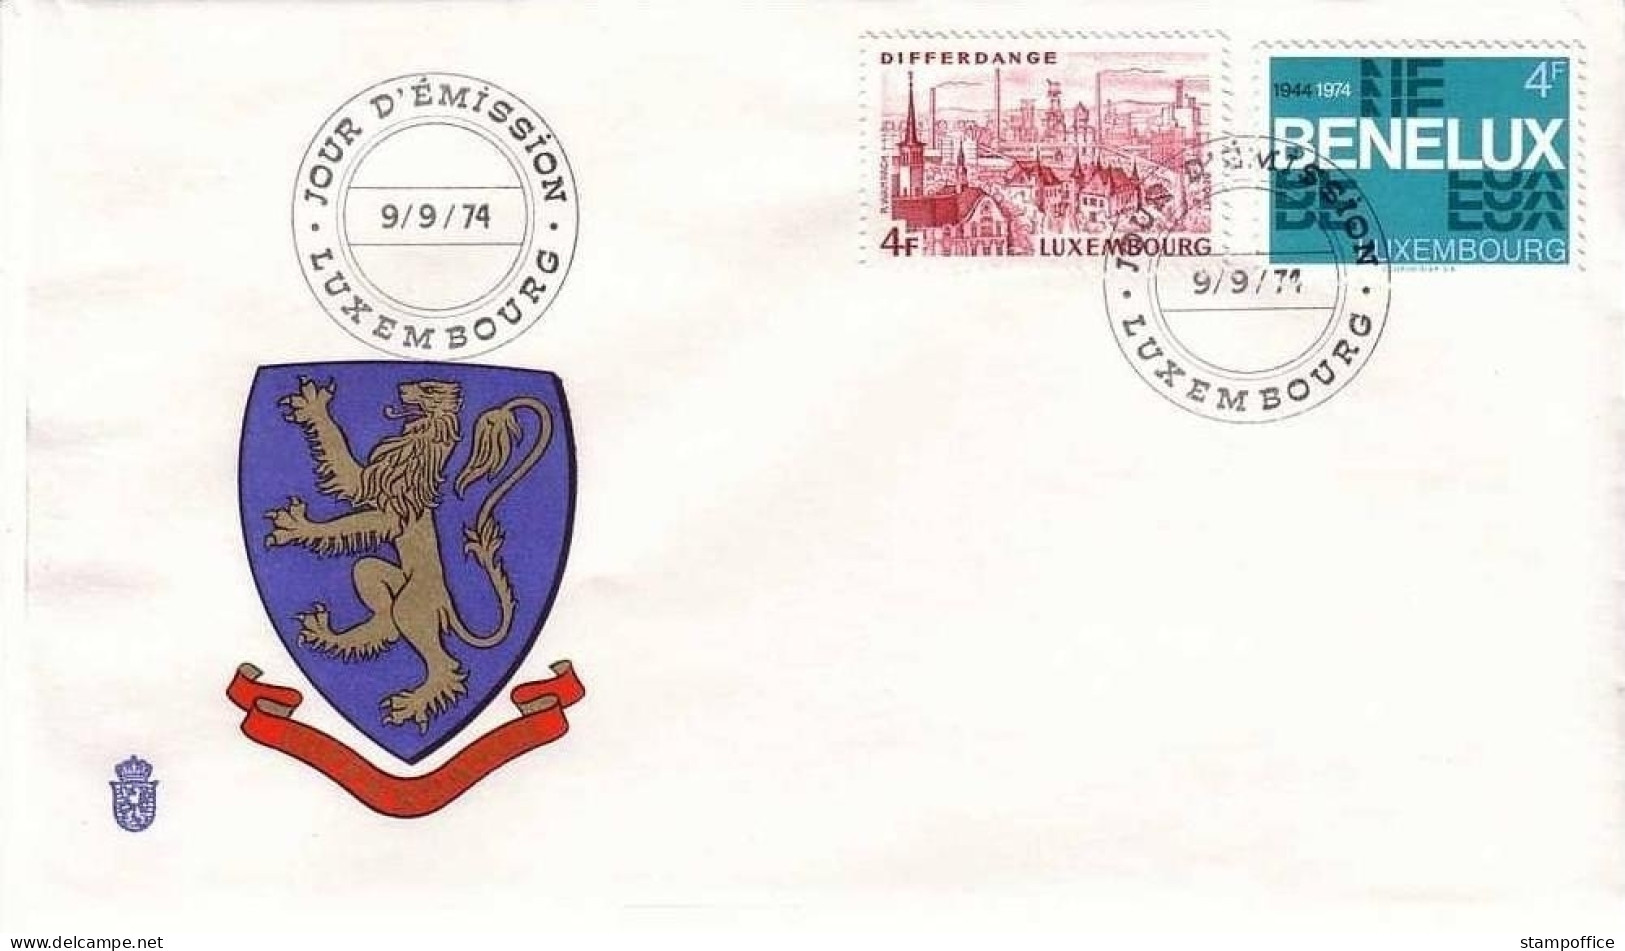 LUXEMBOURG MI-NR. 891-892 FDC KOMBIBRIEF - FDC